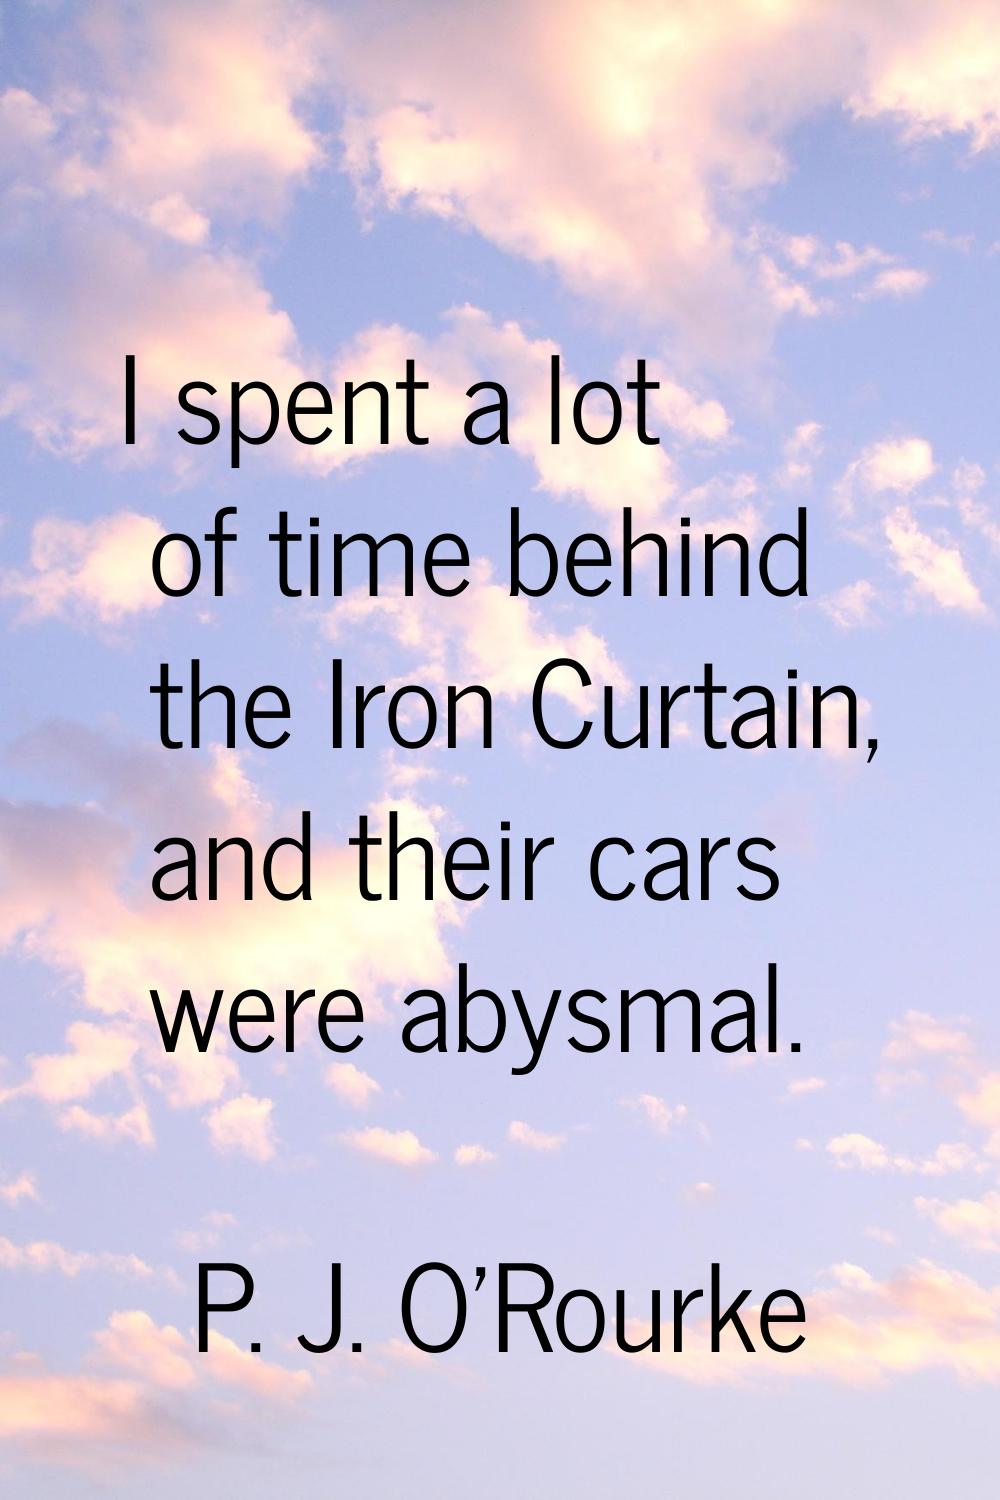 I spent a lot of time behind the Iron Curtain, and their cars were abysmal.